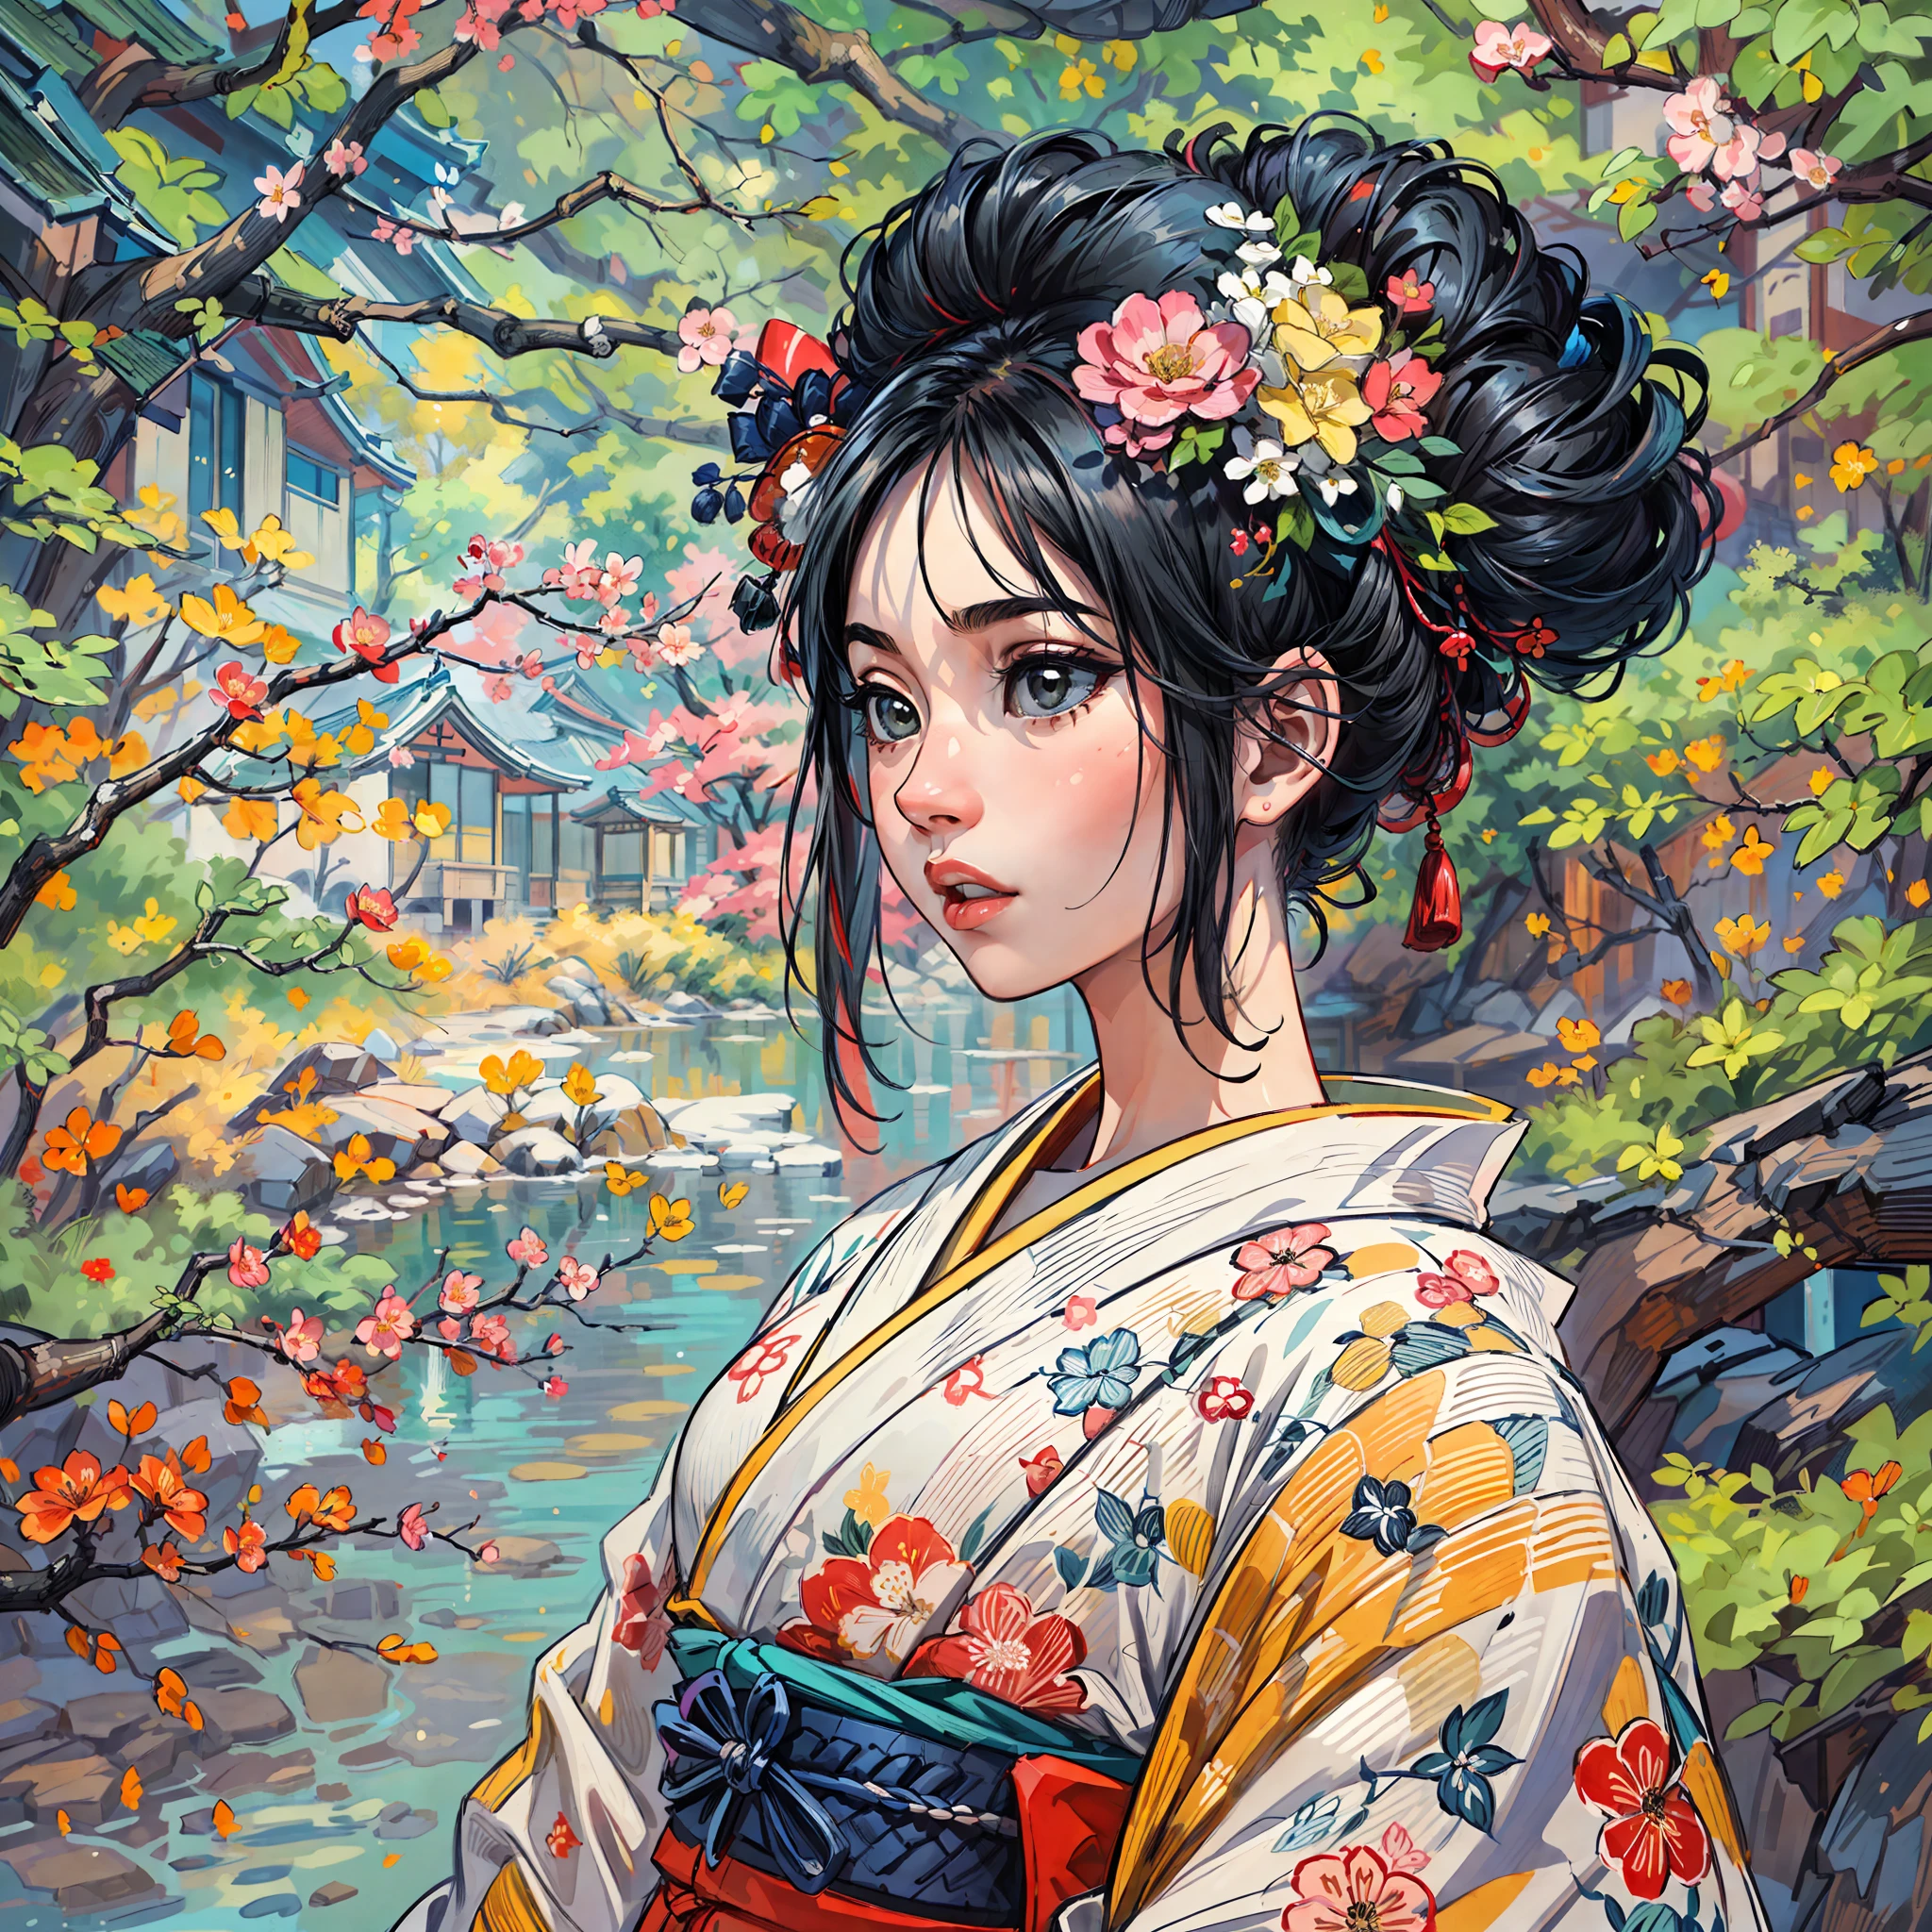 "(A stunning masterpiece with impeccable quality:1.5), captured from a front side view, featuring vibrant and saturated colors, a breathtakingly beautiful girl with black hair and exquisitely detailed face, viewed from a bottom-up perspective, dressed in a traditional kimono, set in the scenic beauty of Japan, surrounded by the authentic ambiance of tatami mats, with an open window framing the scene."